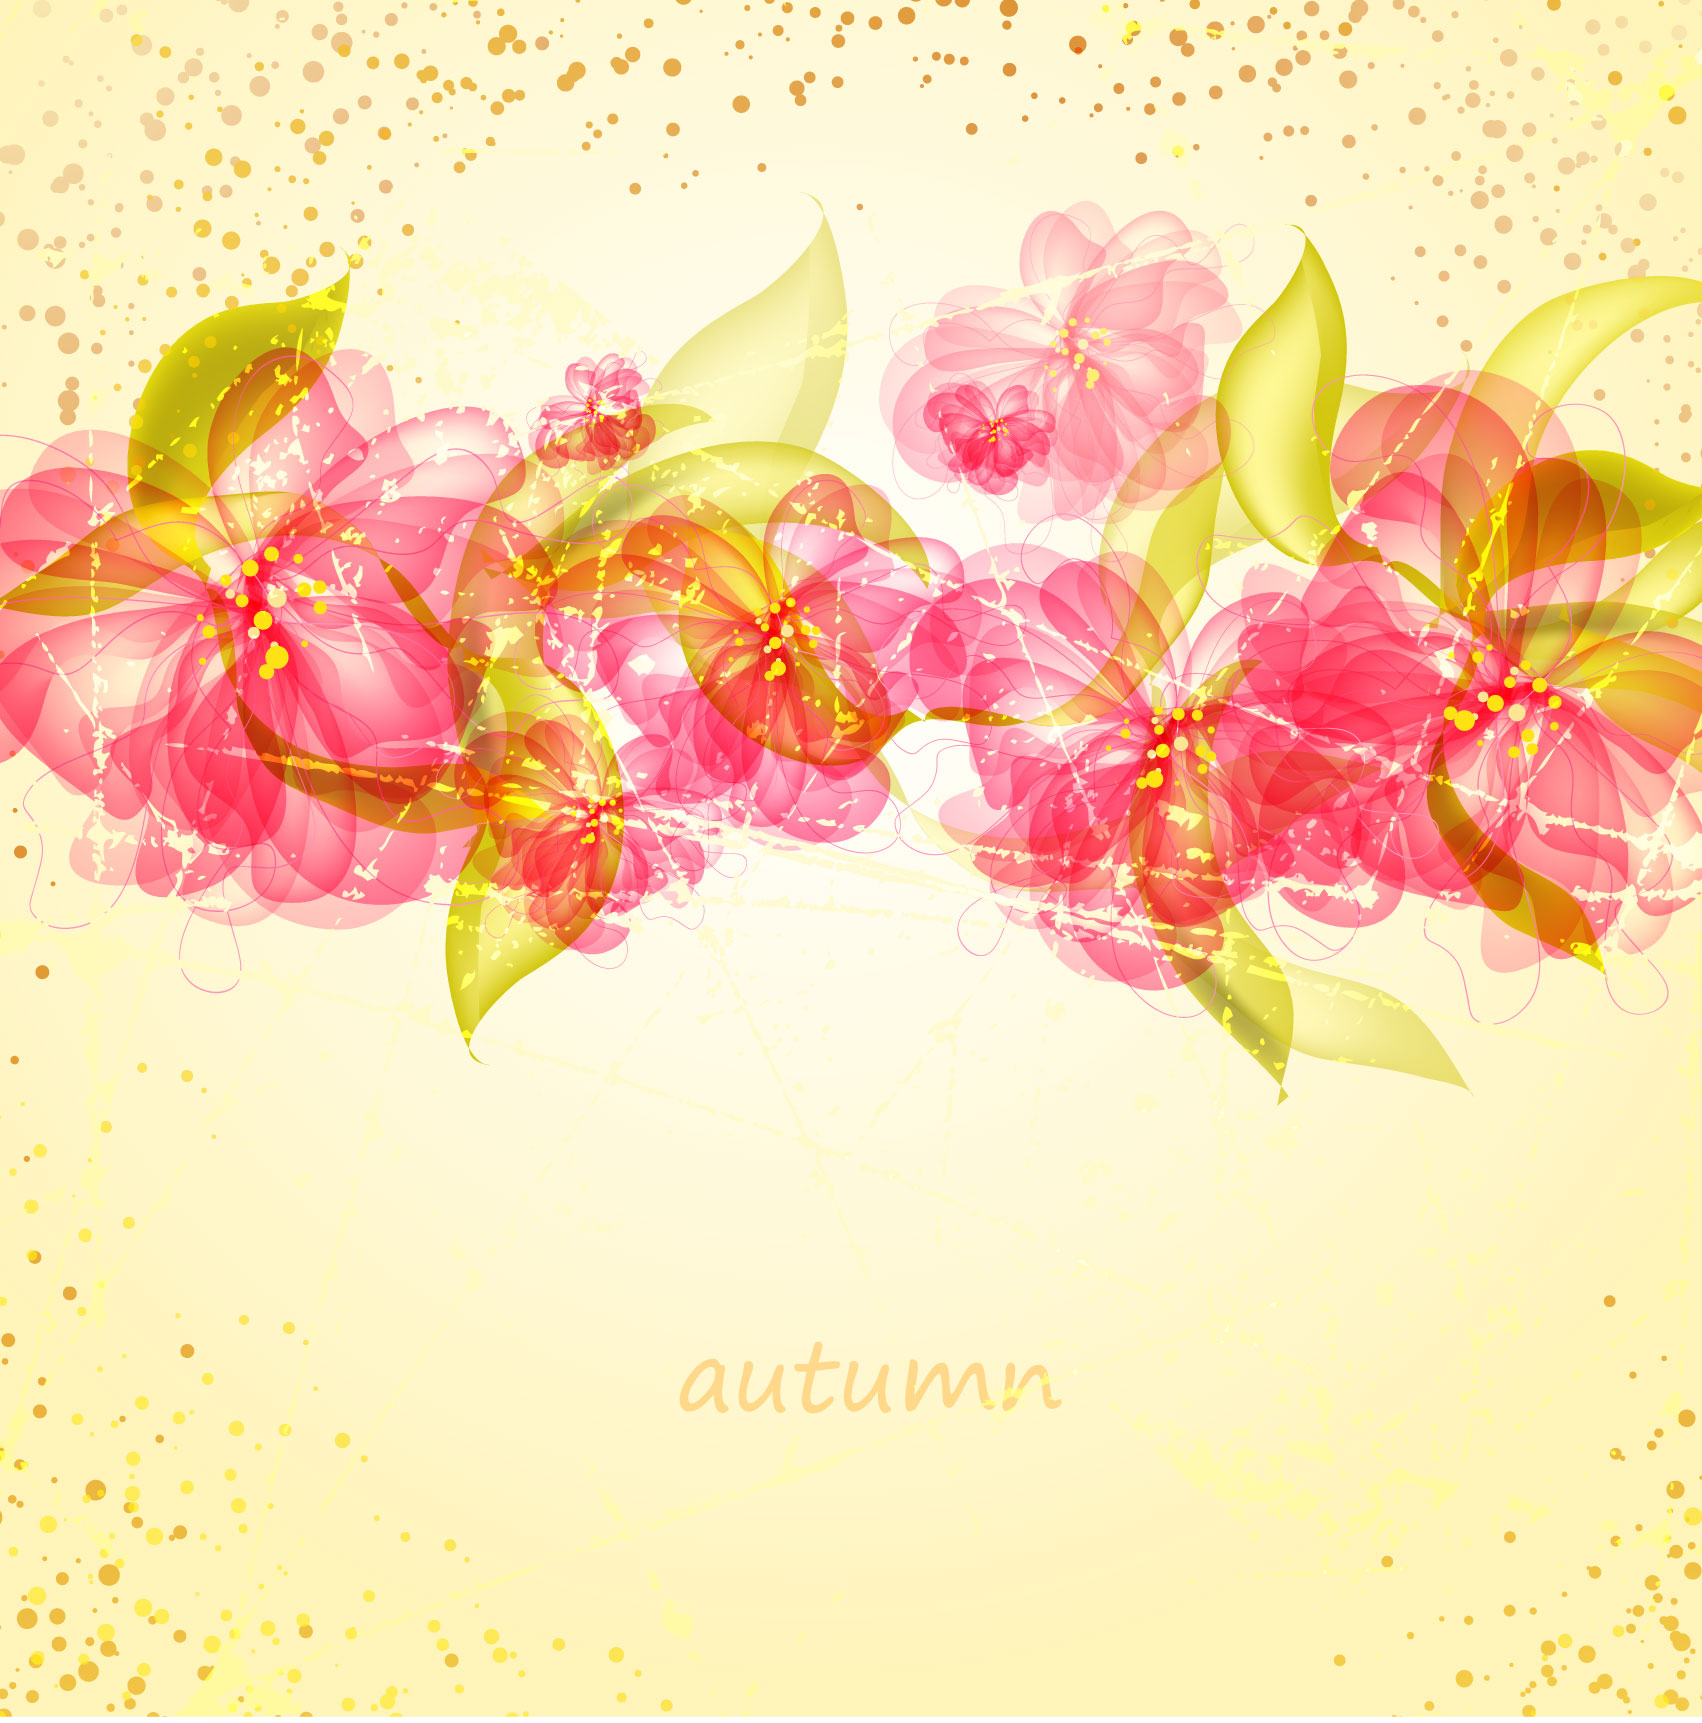  vector colorful flowers background 01 vector 020513 colorful flowers